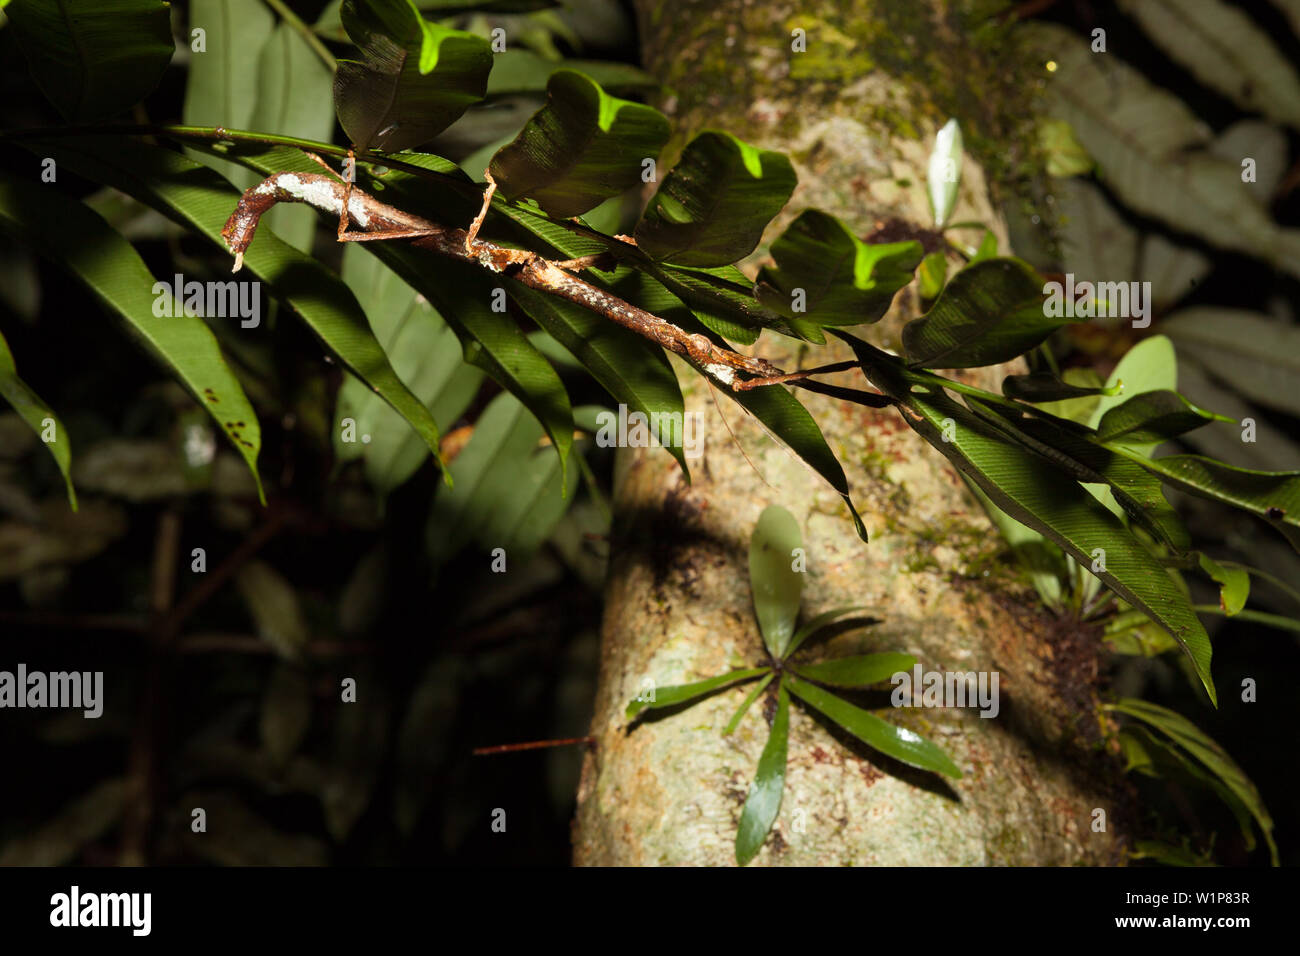 Stick insect at night in rainforest borneo Stock Photo